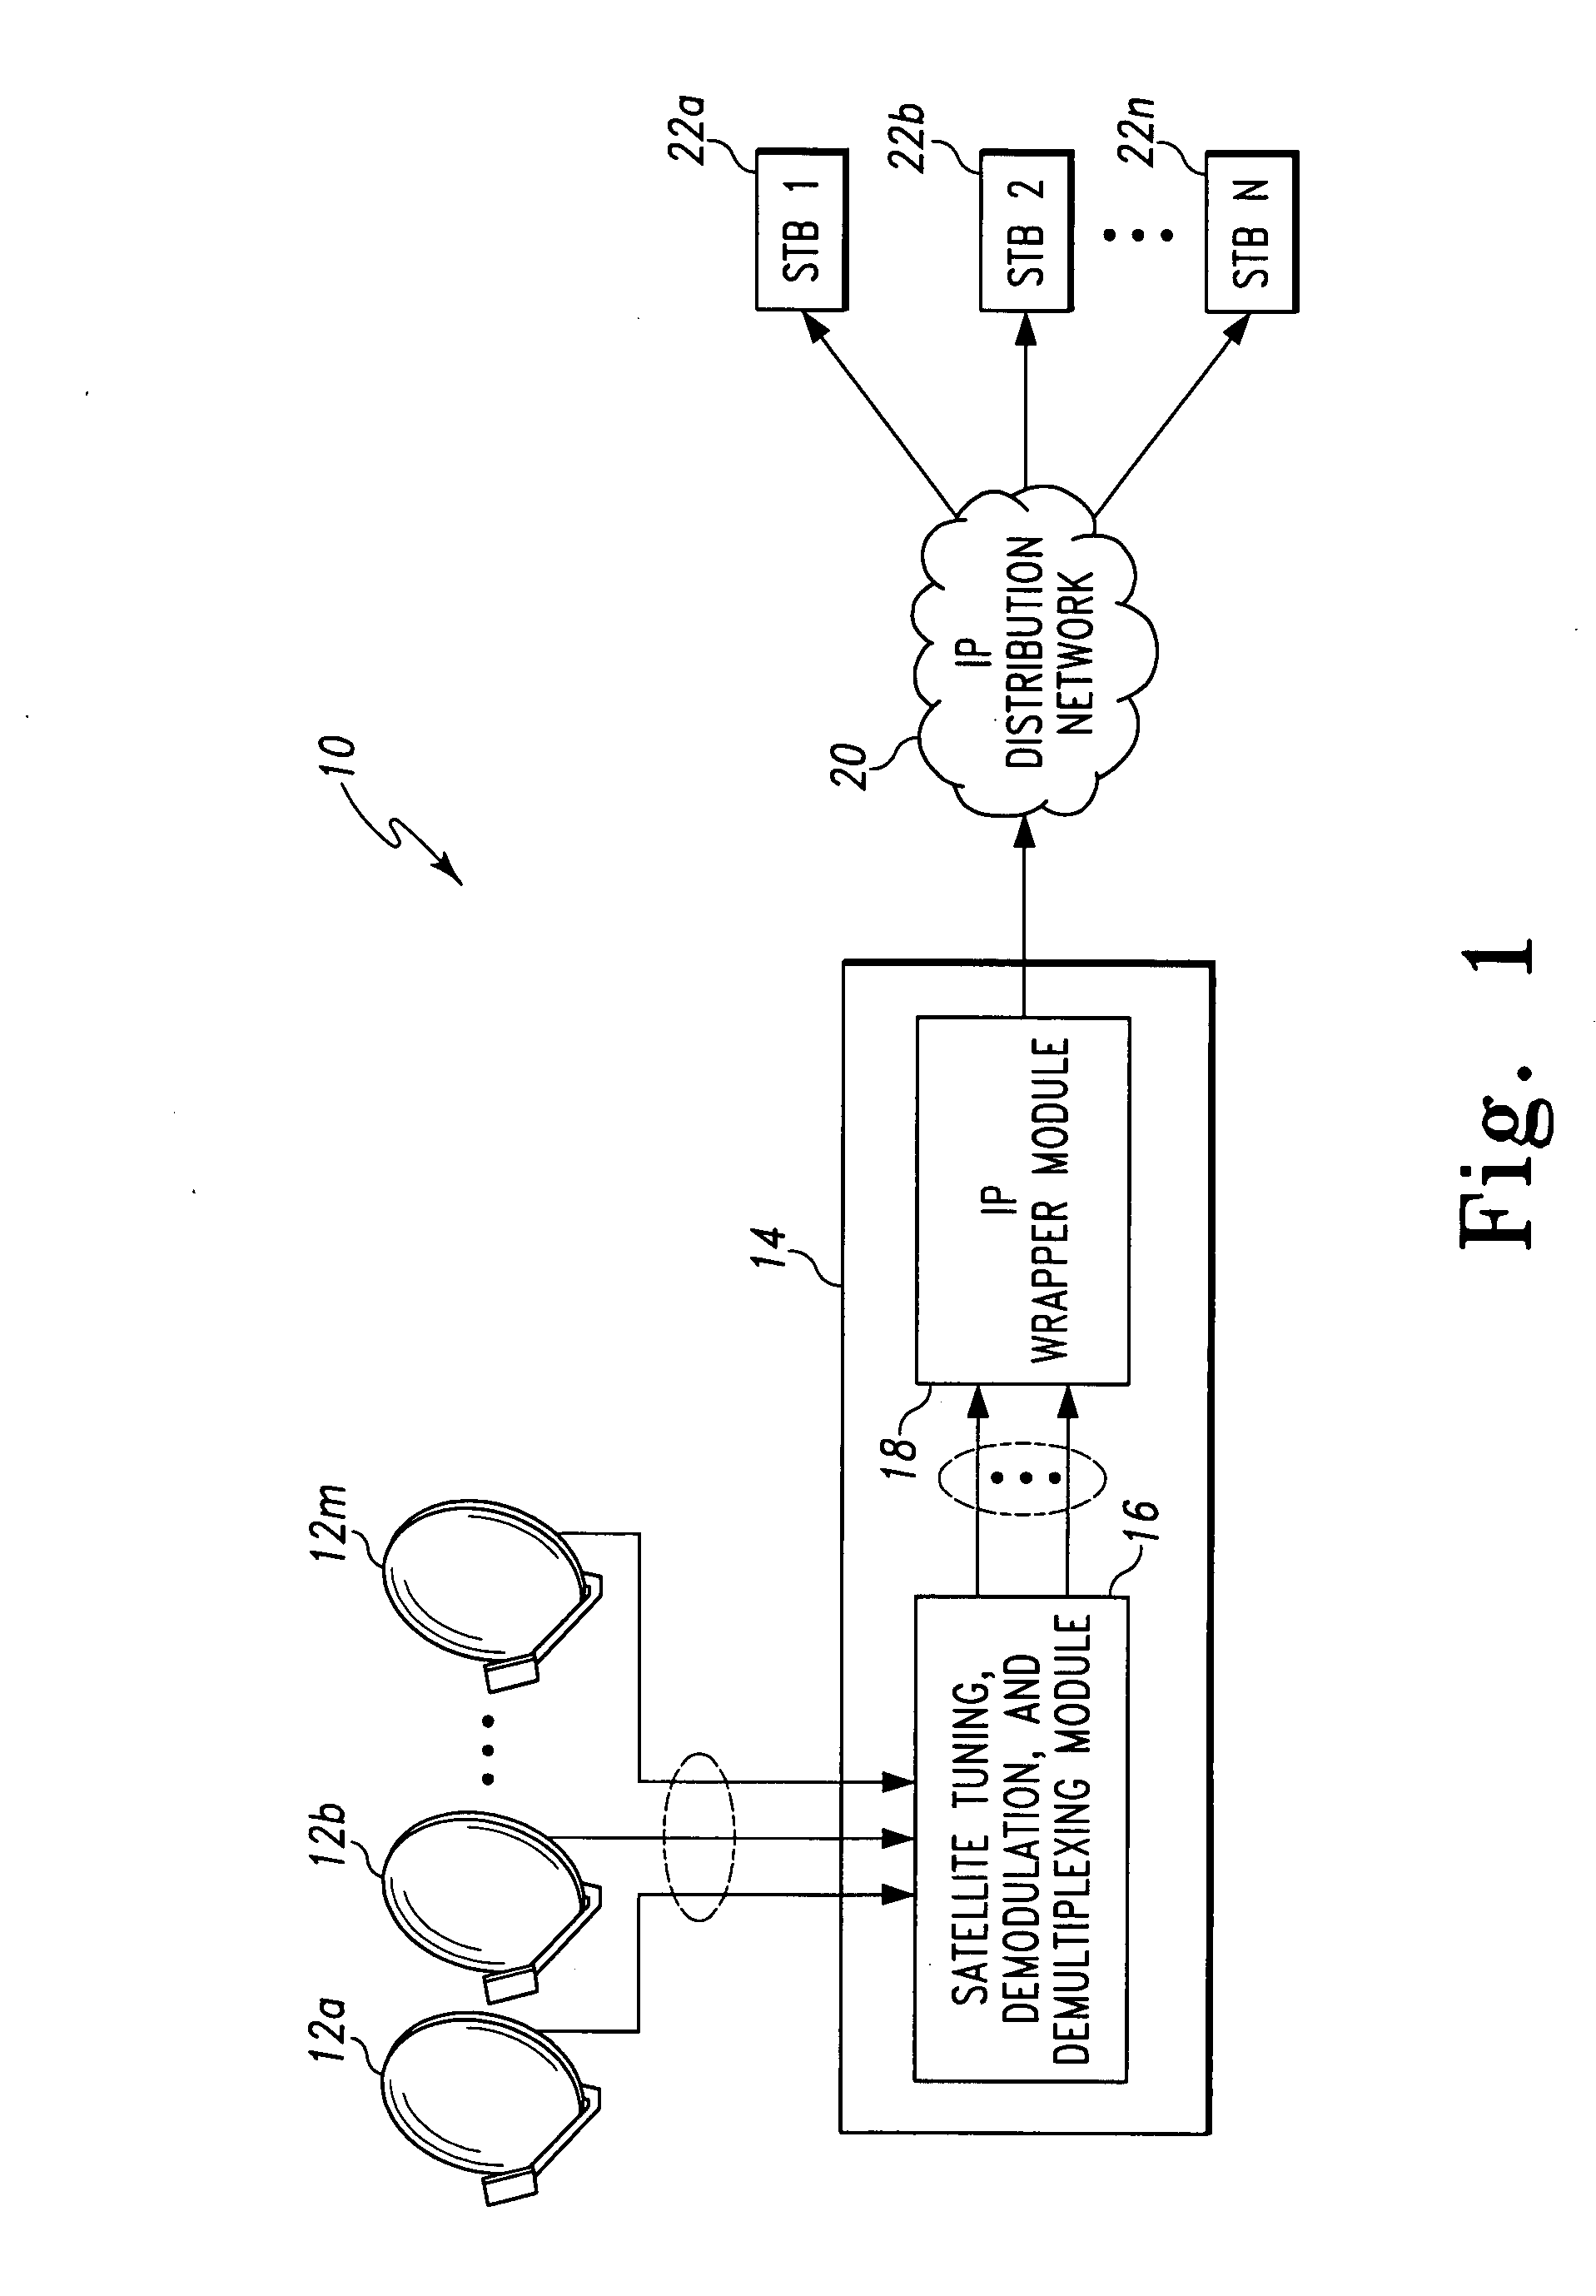 System and method for inserting sync bytes into transport packets